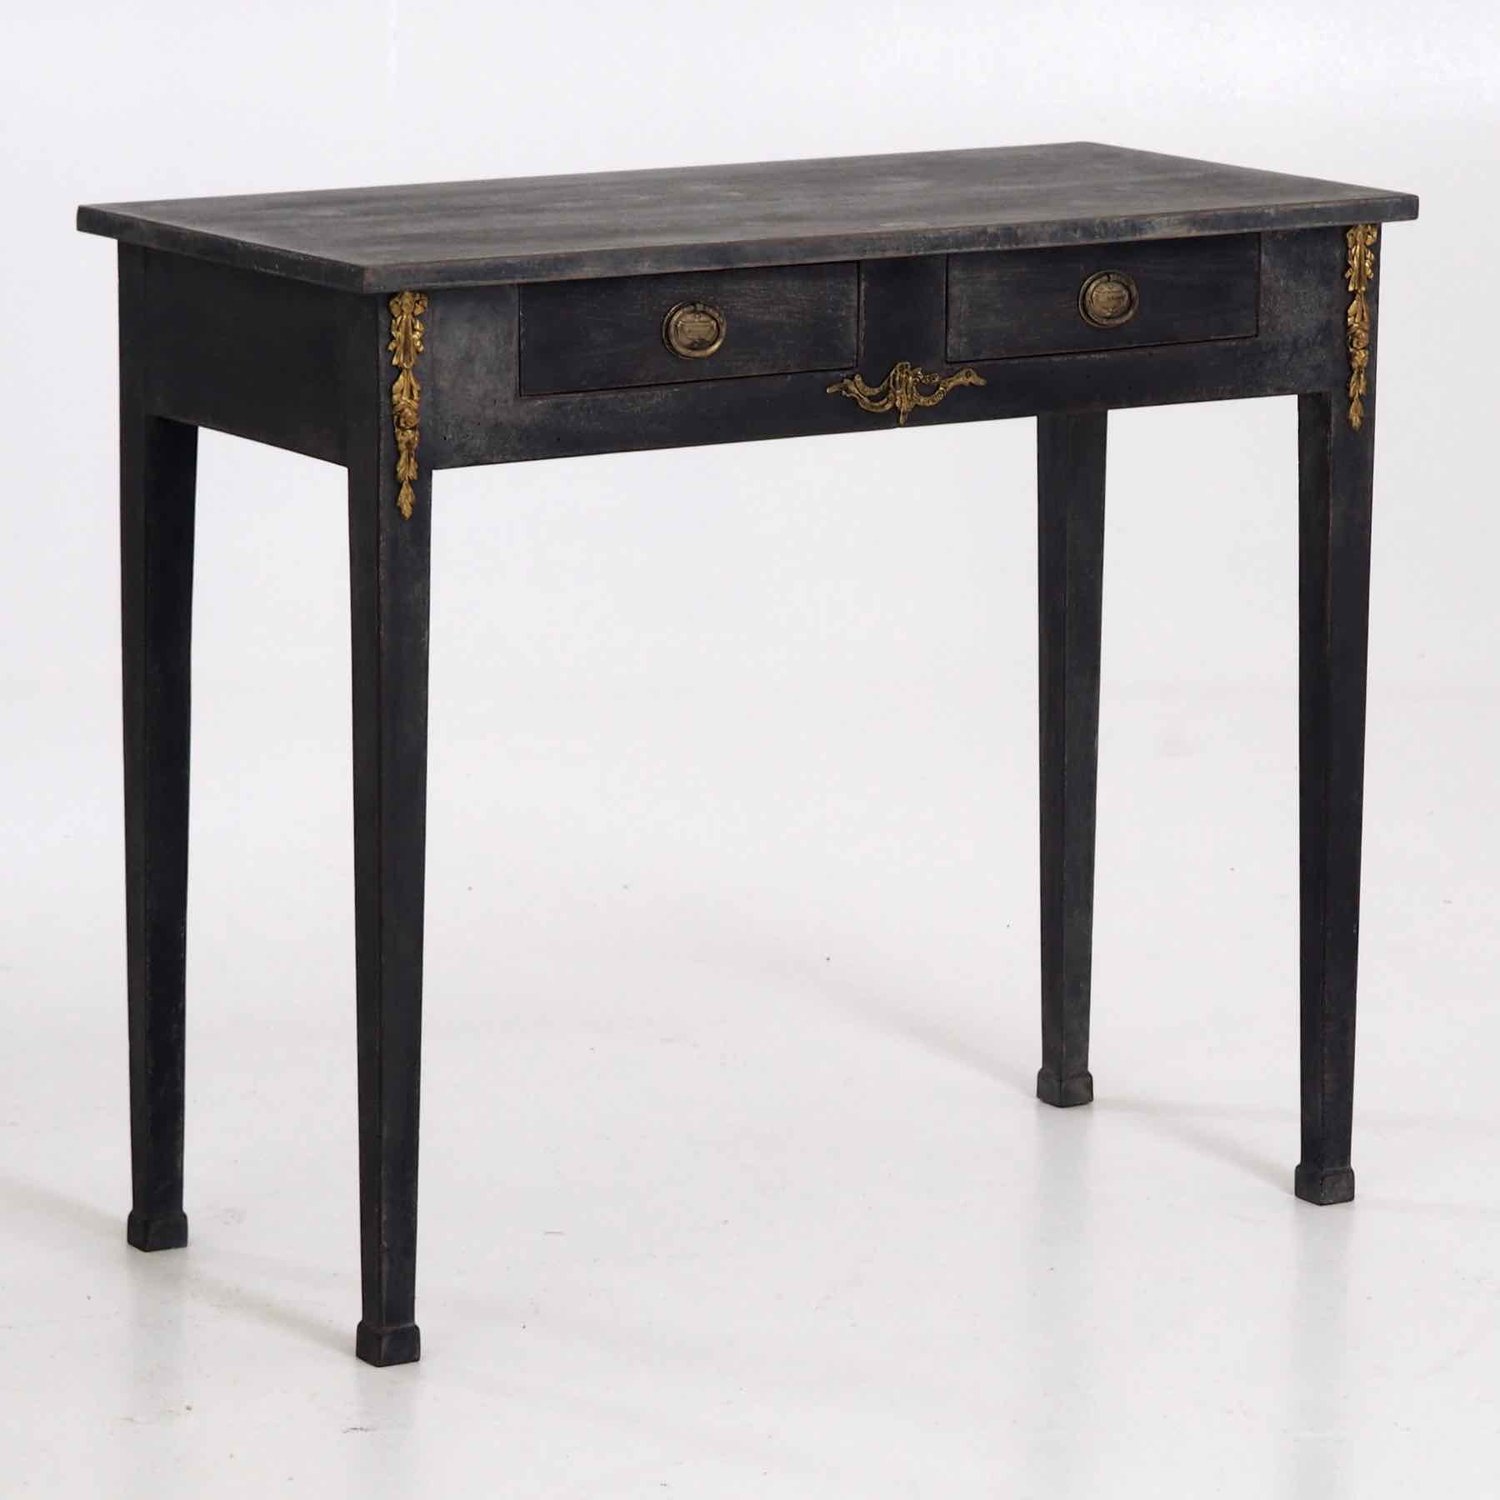 Charming Bronze Mounted Console Table With Two Drawers Circa 100